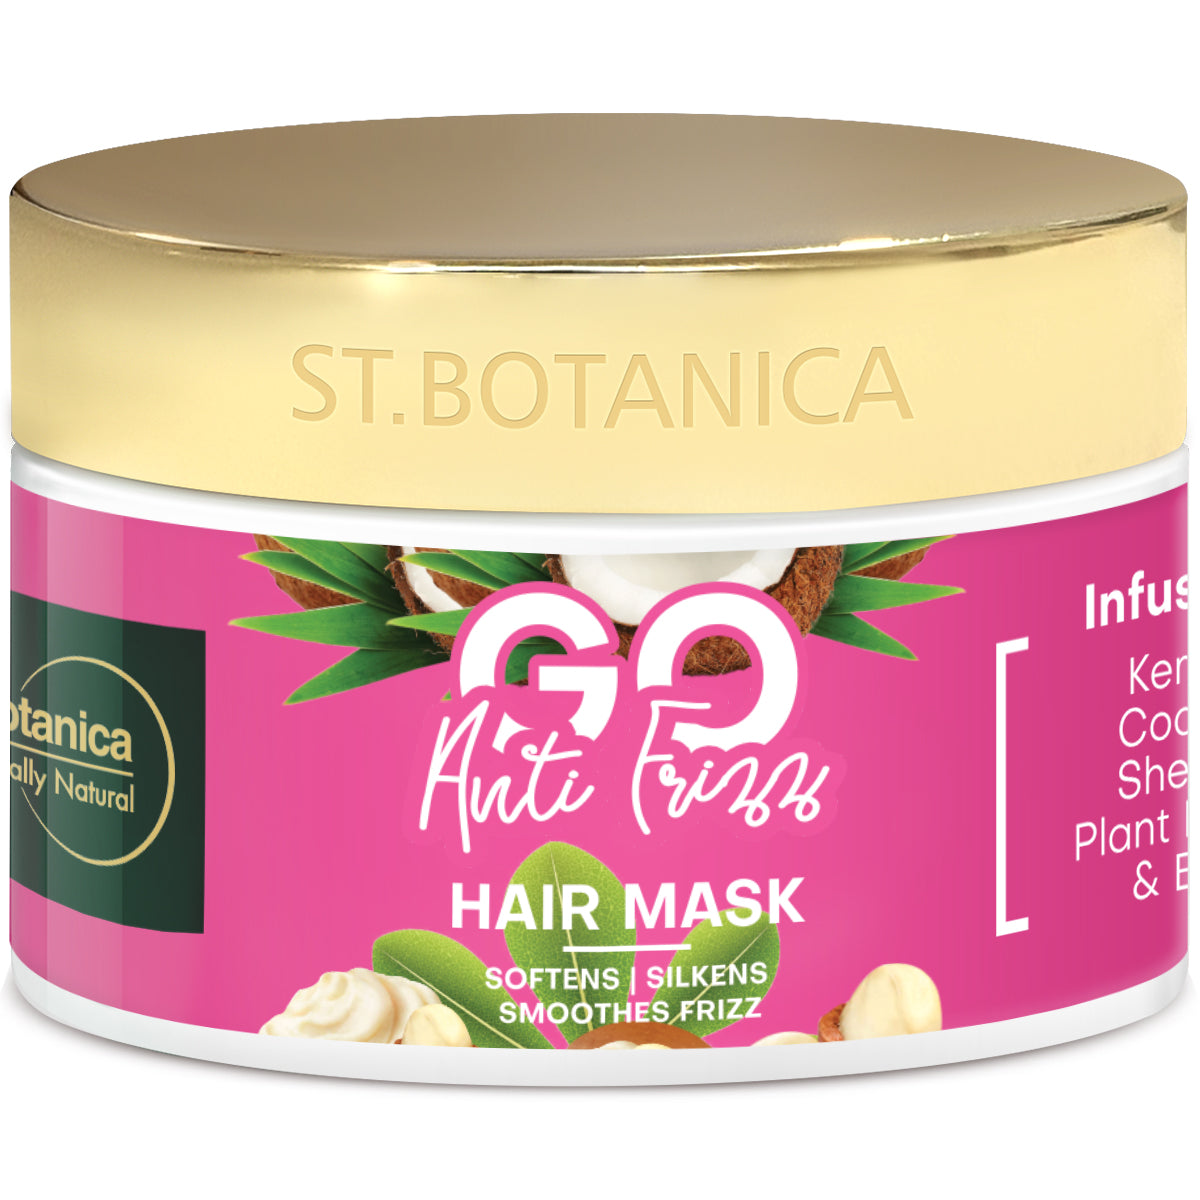 St.Botanica GO Anti Frizz Hair Mask - Infused With Coconut Oil, Shea Butter, Keratin 3%, No Silicones - 200 g